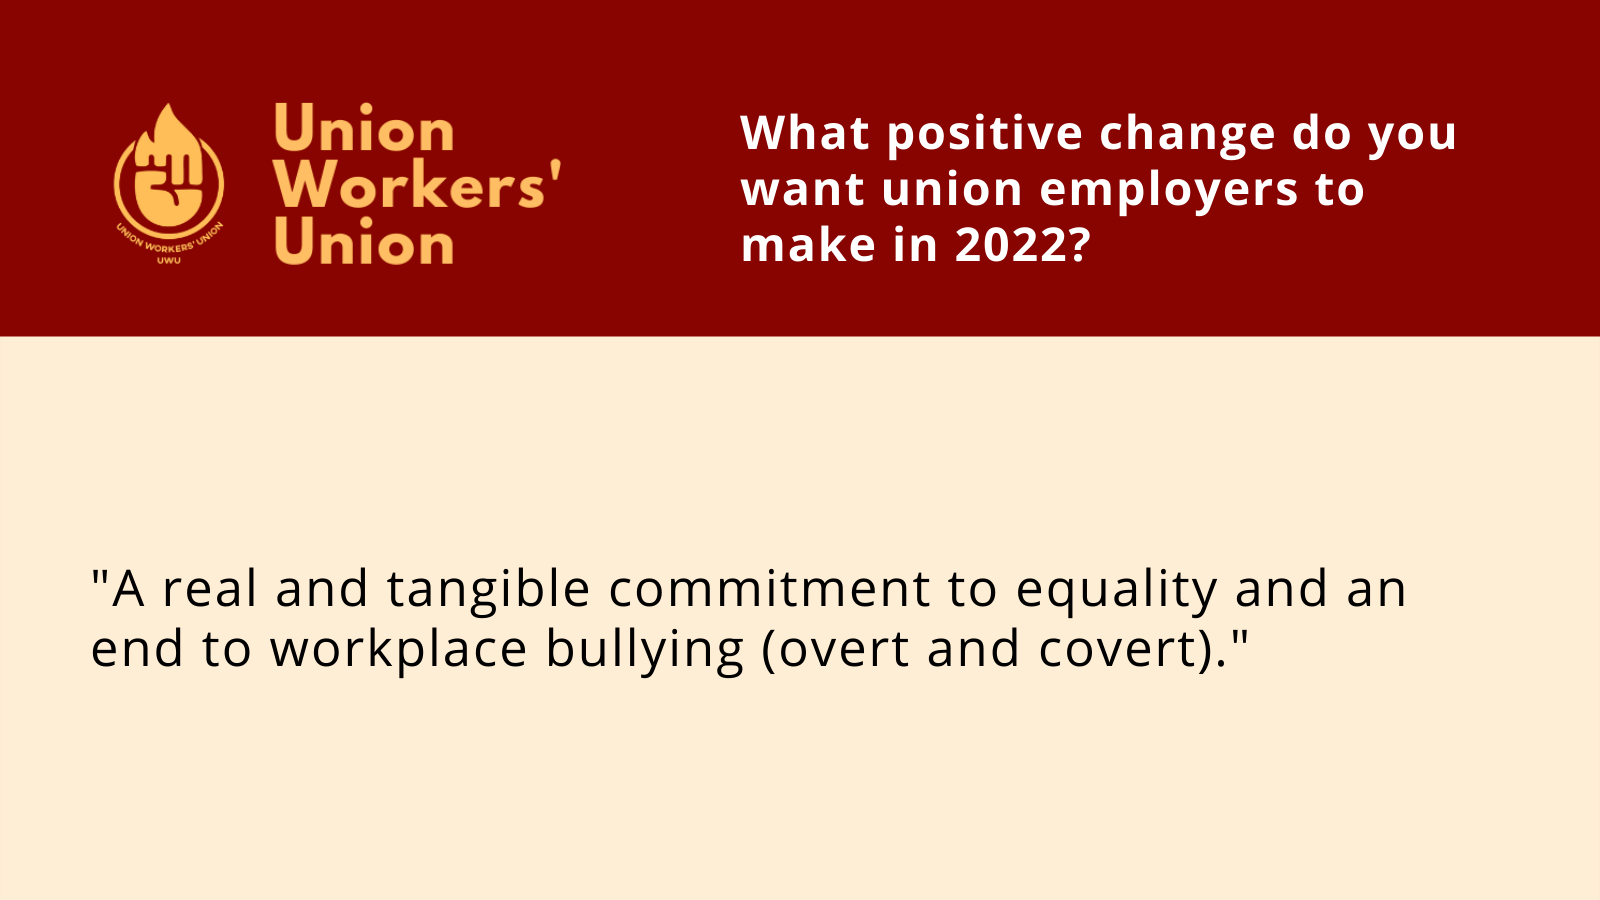 UWU logo by the question, what positive changes do you want union employers to make in 2022? Member response: A real and tangible commitment to equality and an end to workplace bullying (overt and covert).